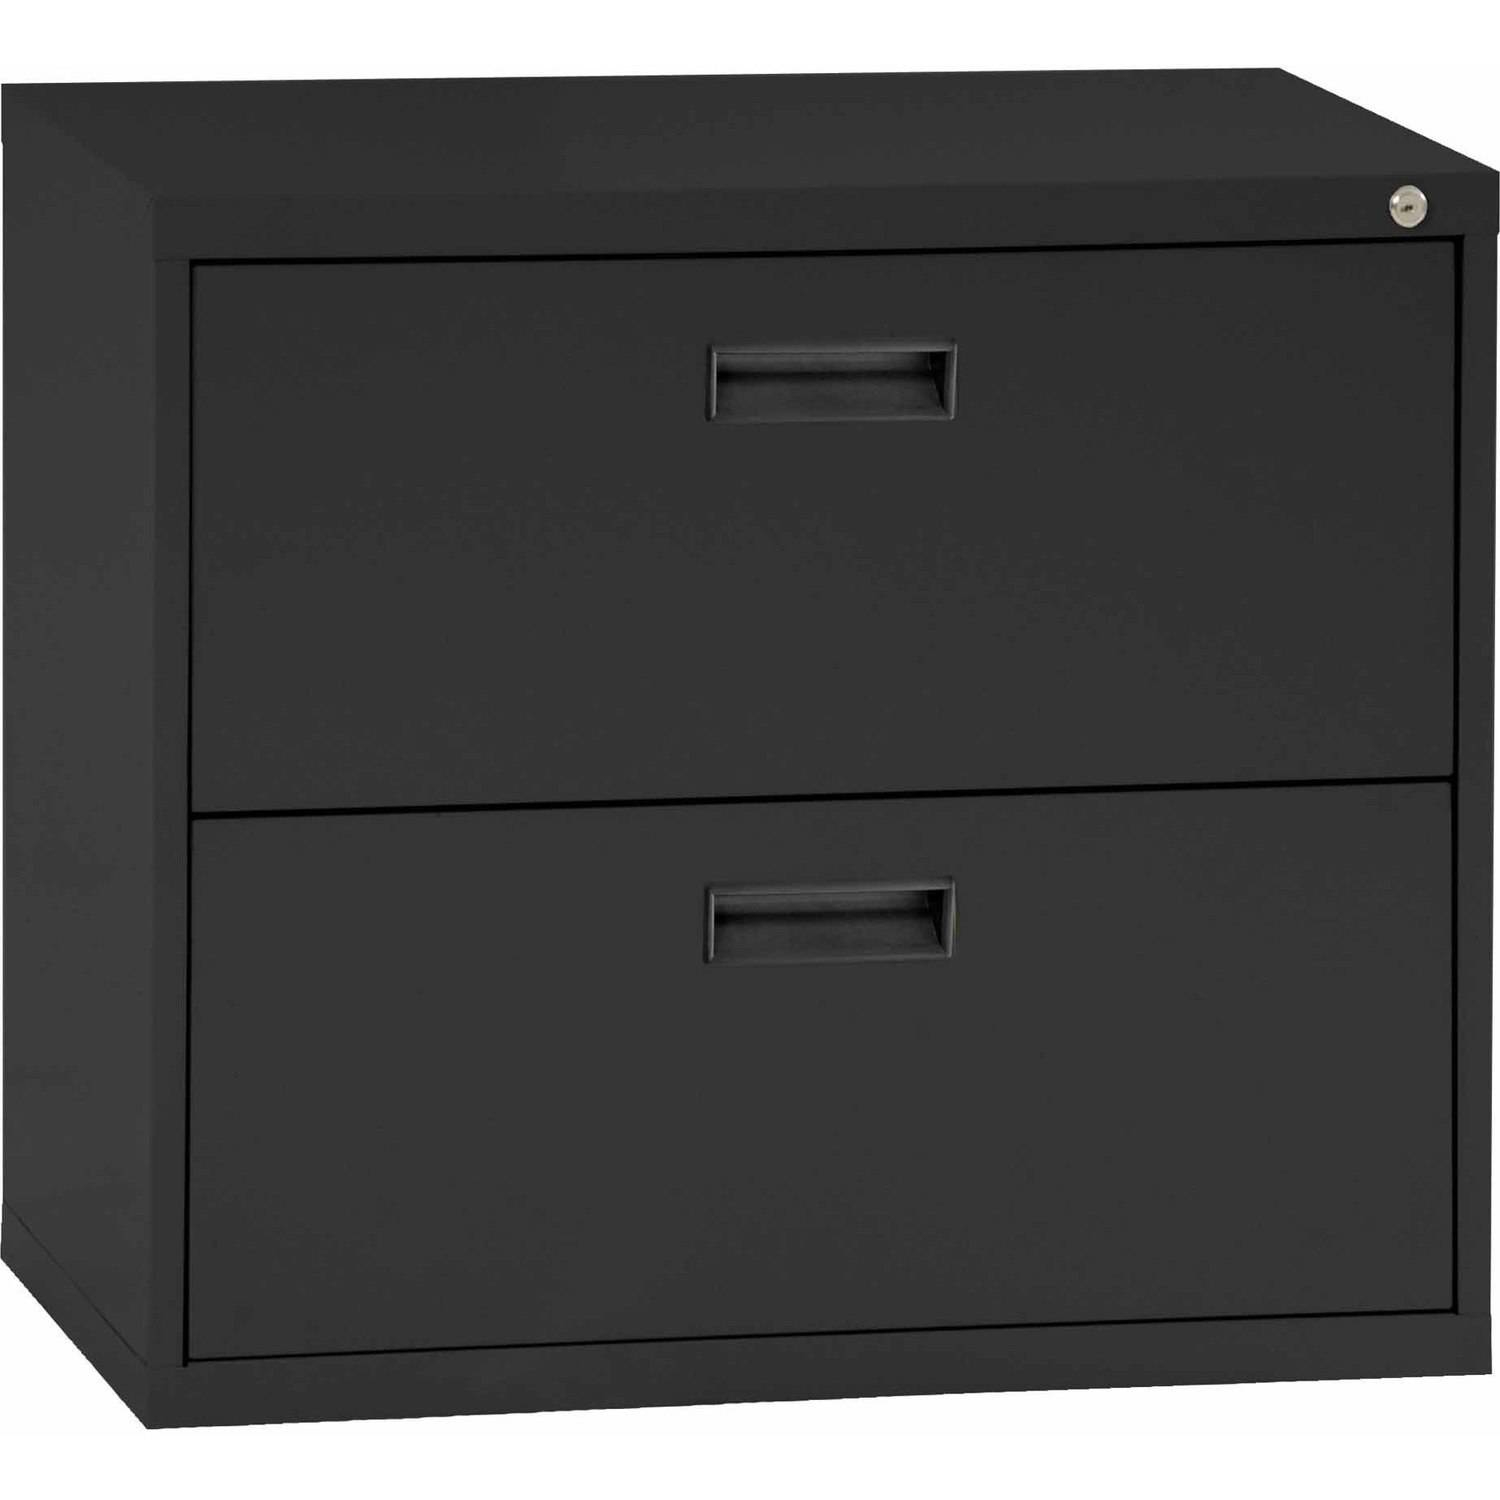 Sandusky Steel Lateral File Cabinet With Plastic Handle 2 Drawers with regard to size 1500 X 1500